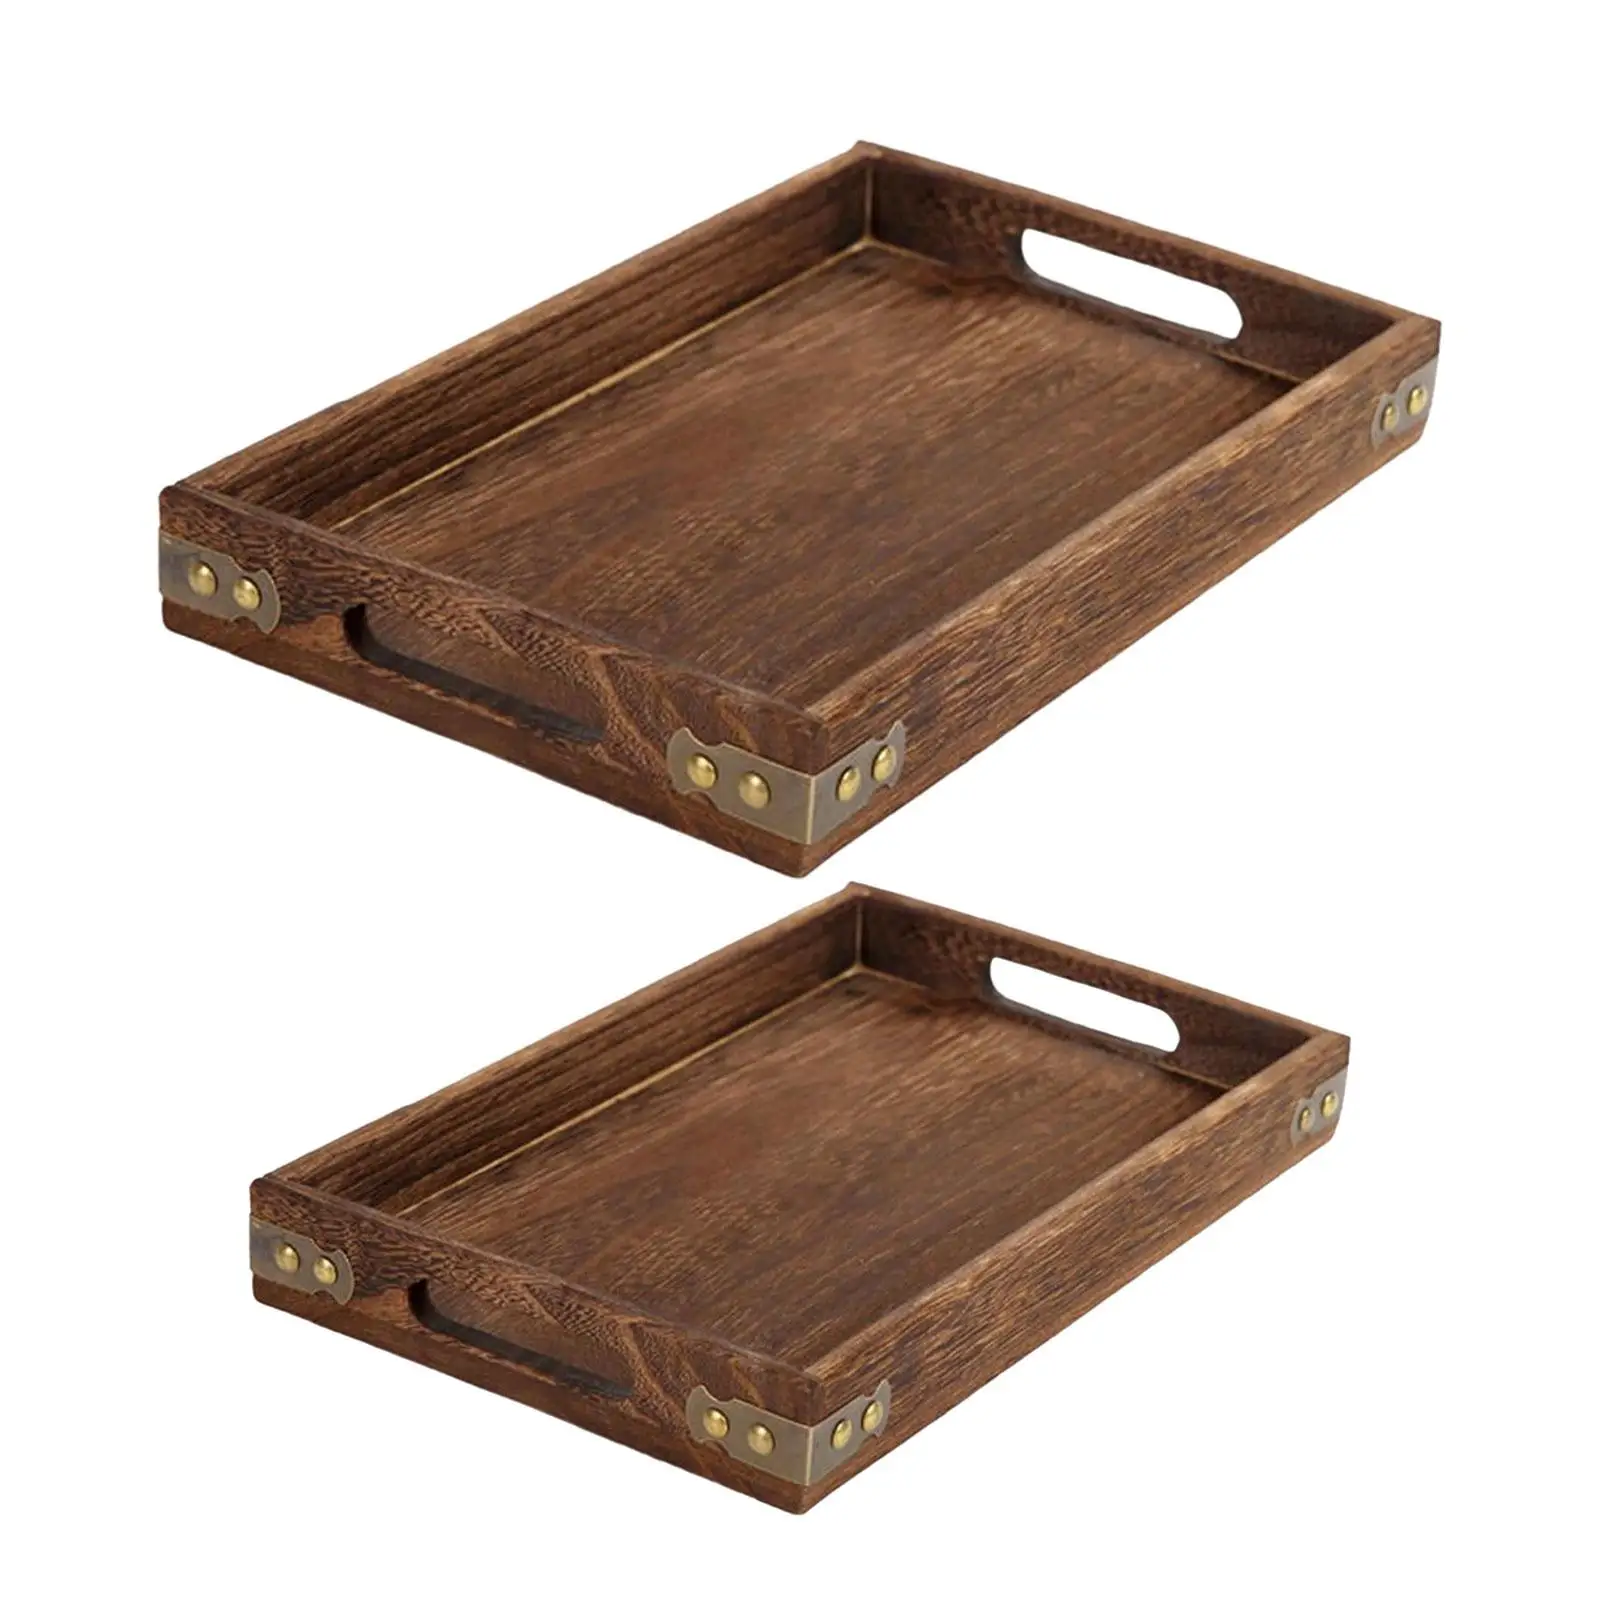 Wooden Serving Tray with Handle Eating Tray Housewarming Party Gift Durable